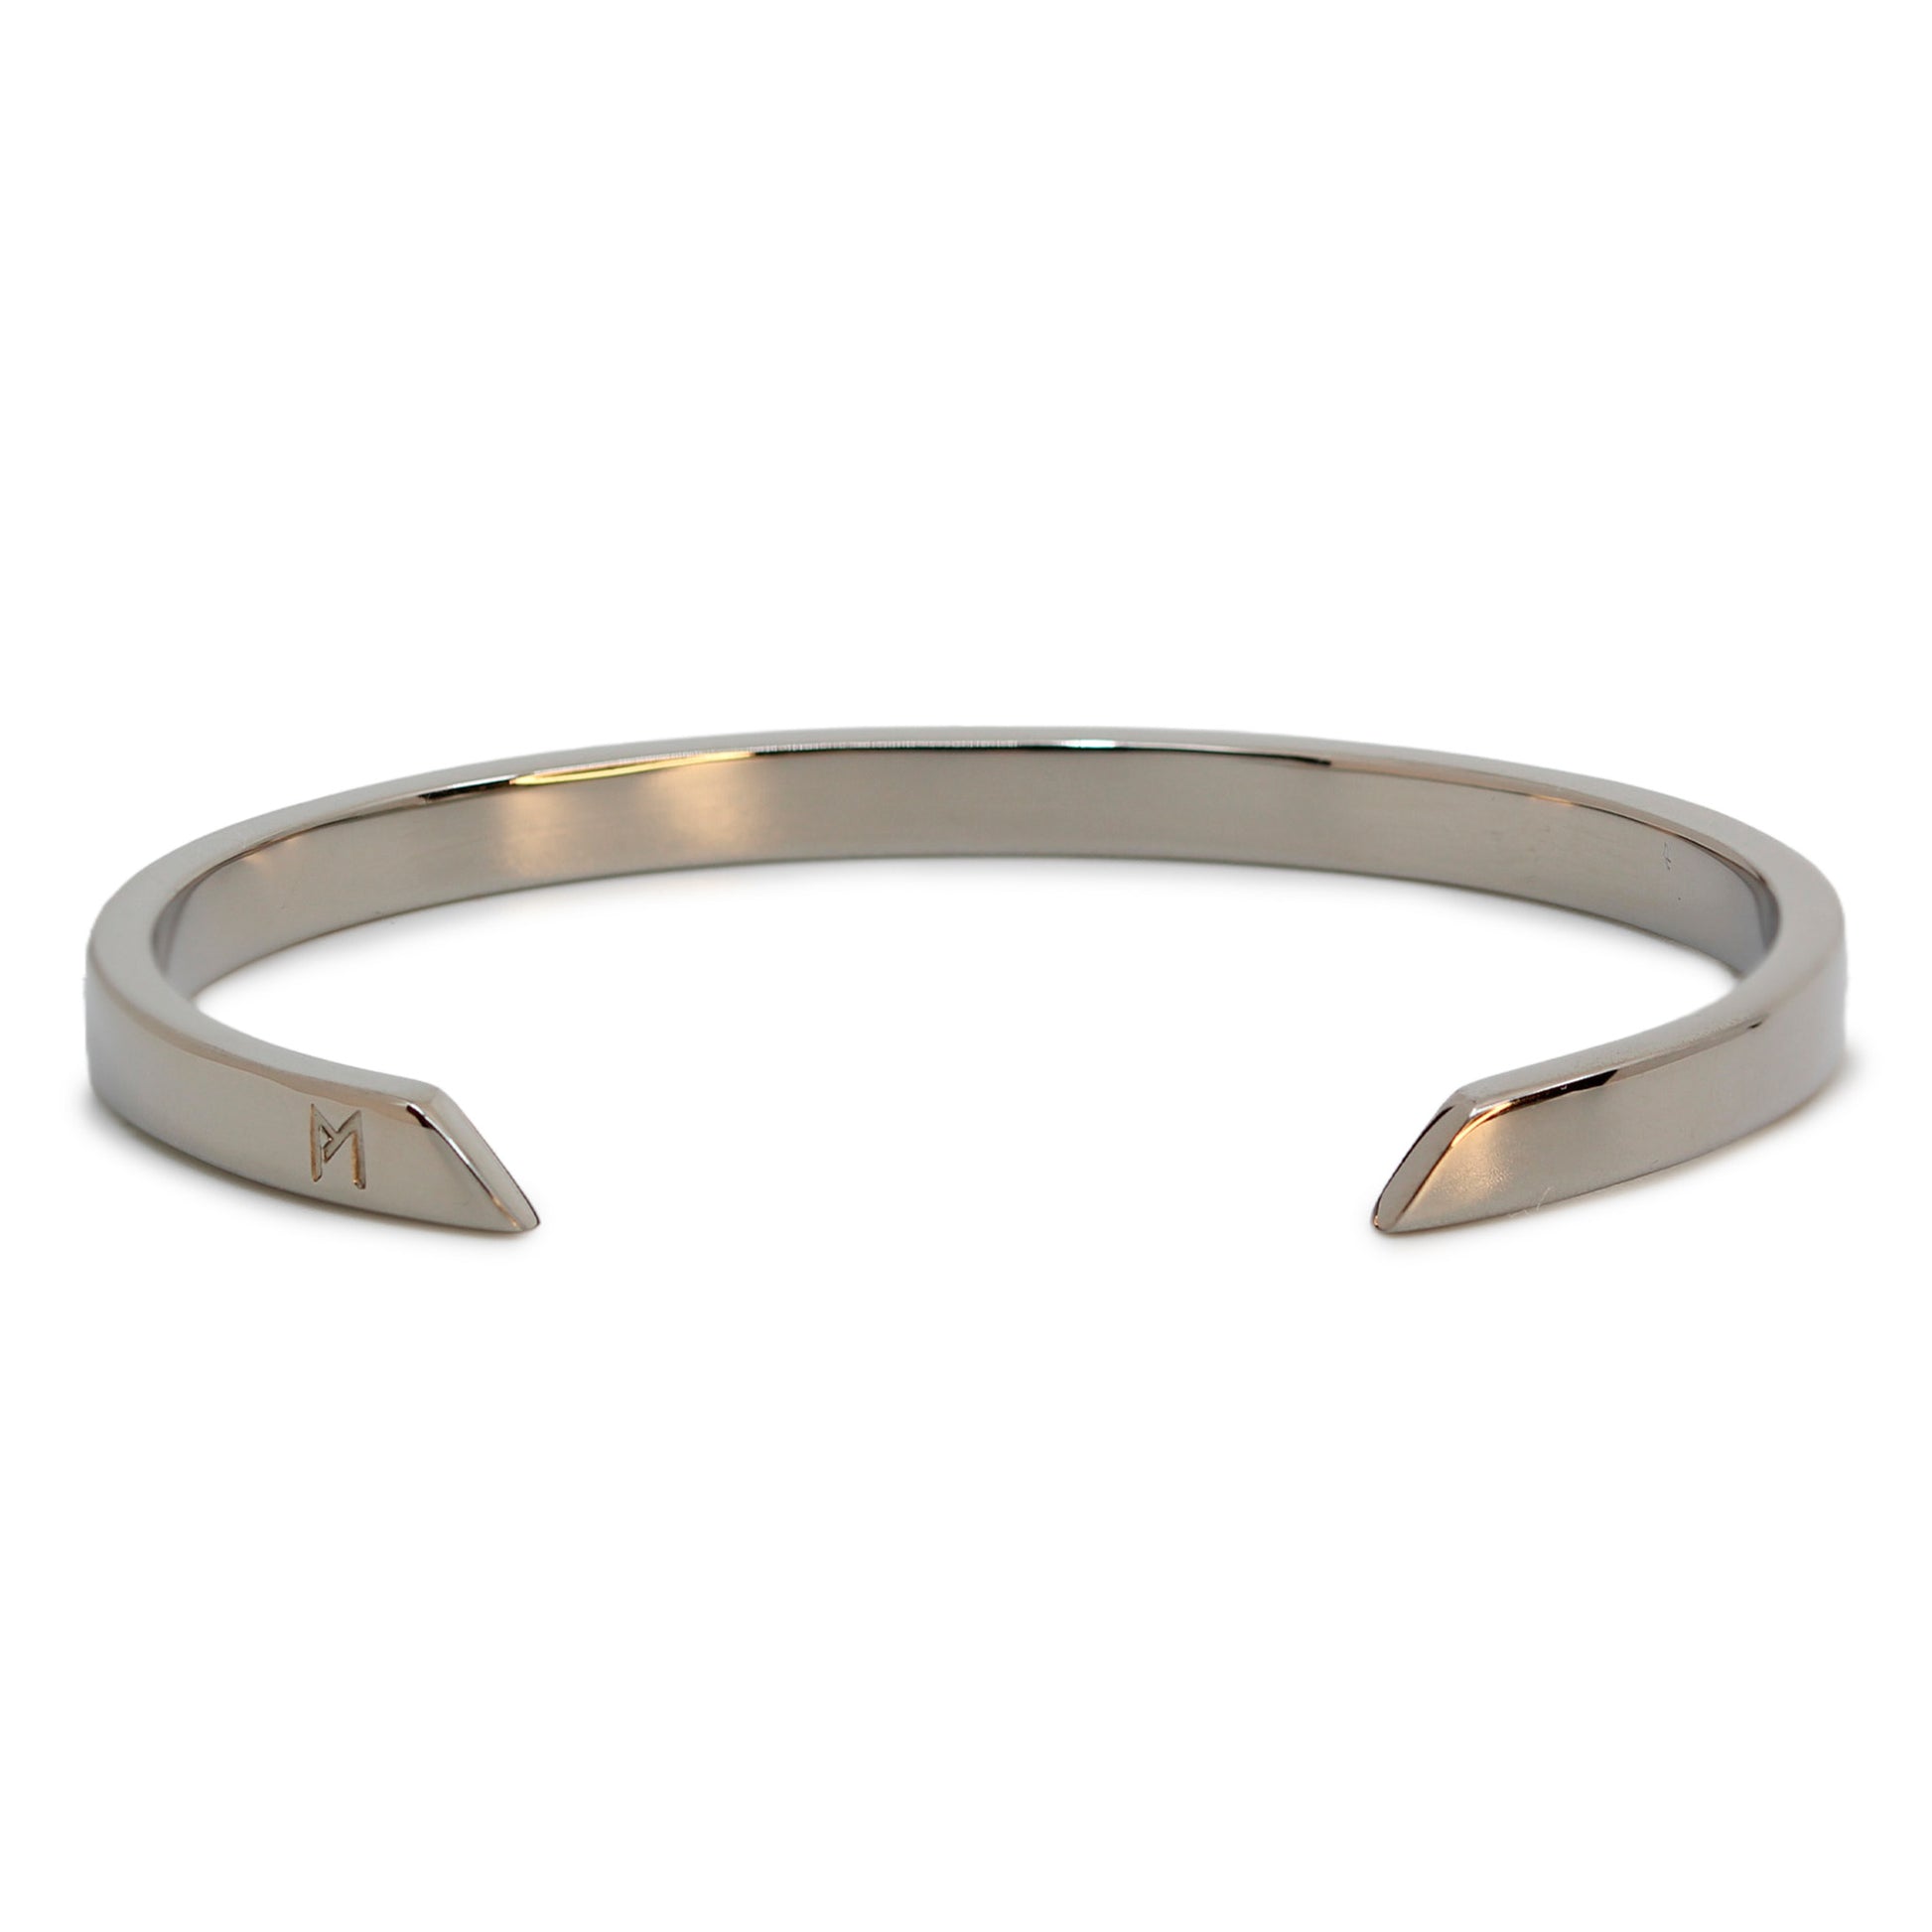 Single silver-colored titanium bangle, 5 mm wide. Image shows back view of bangle.